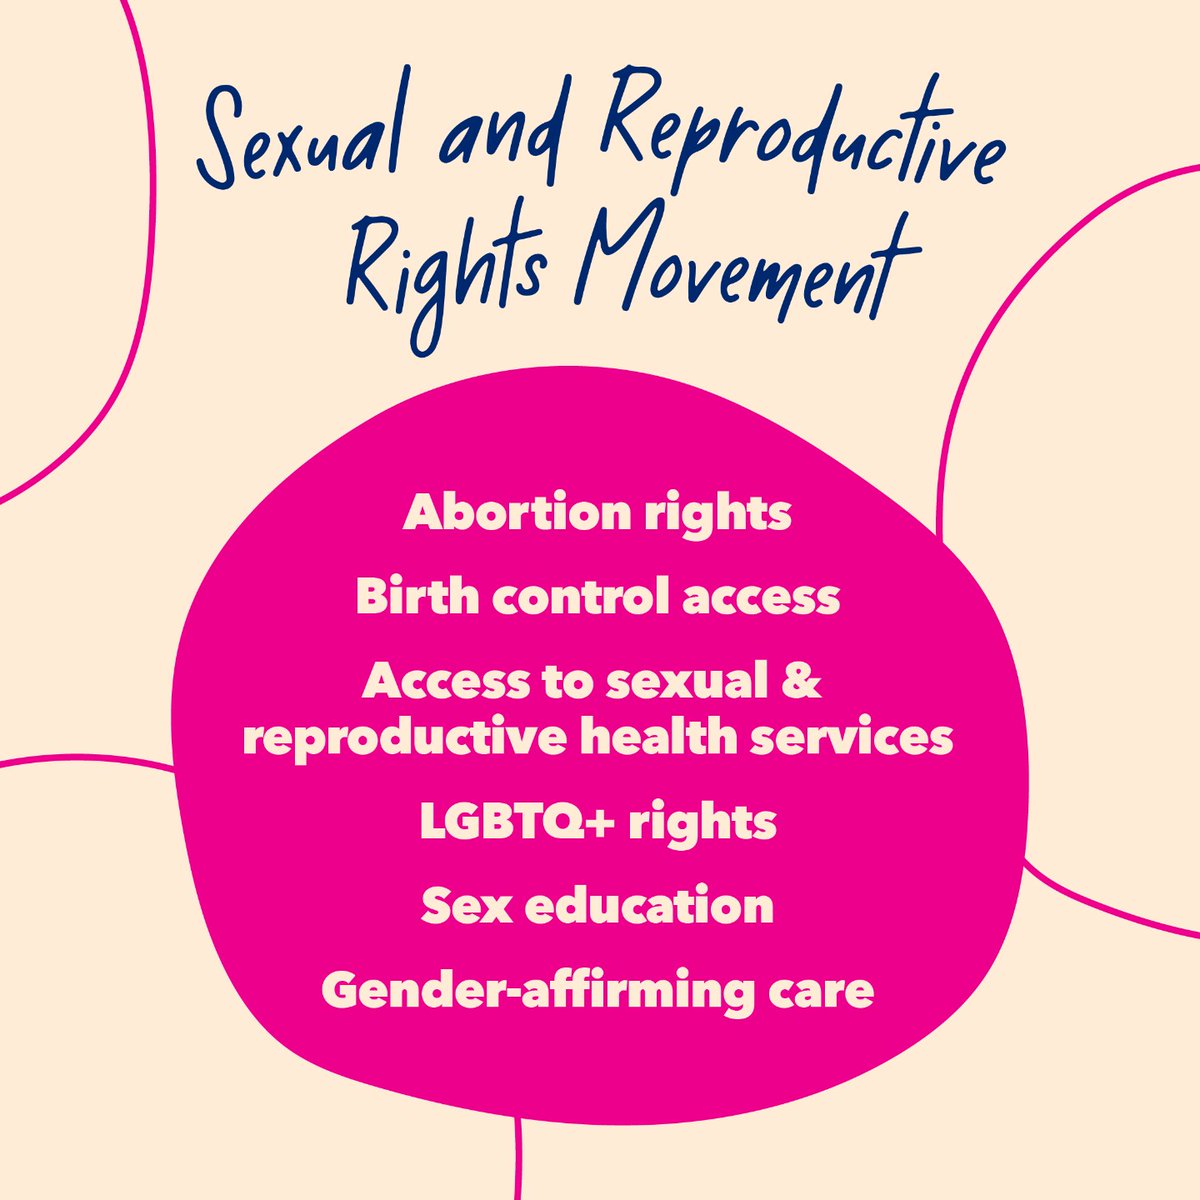 The movement for sexual and reproductive rights includes many fights, but the goal is the same: making sure you have the freedom to control your own body. 💪